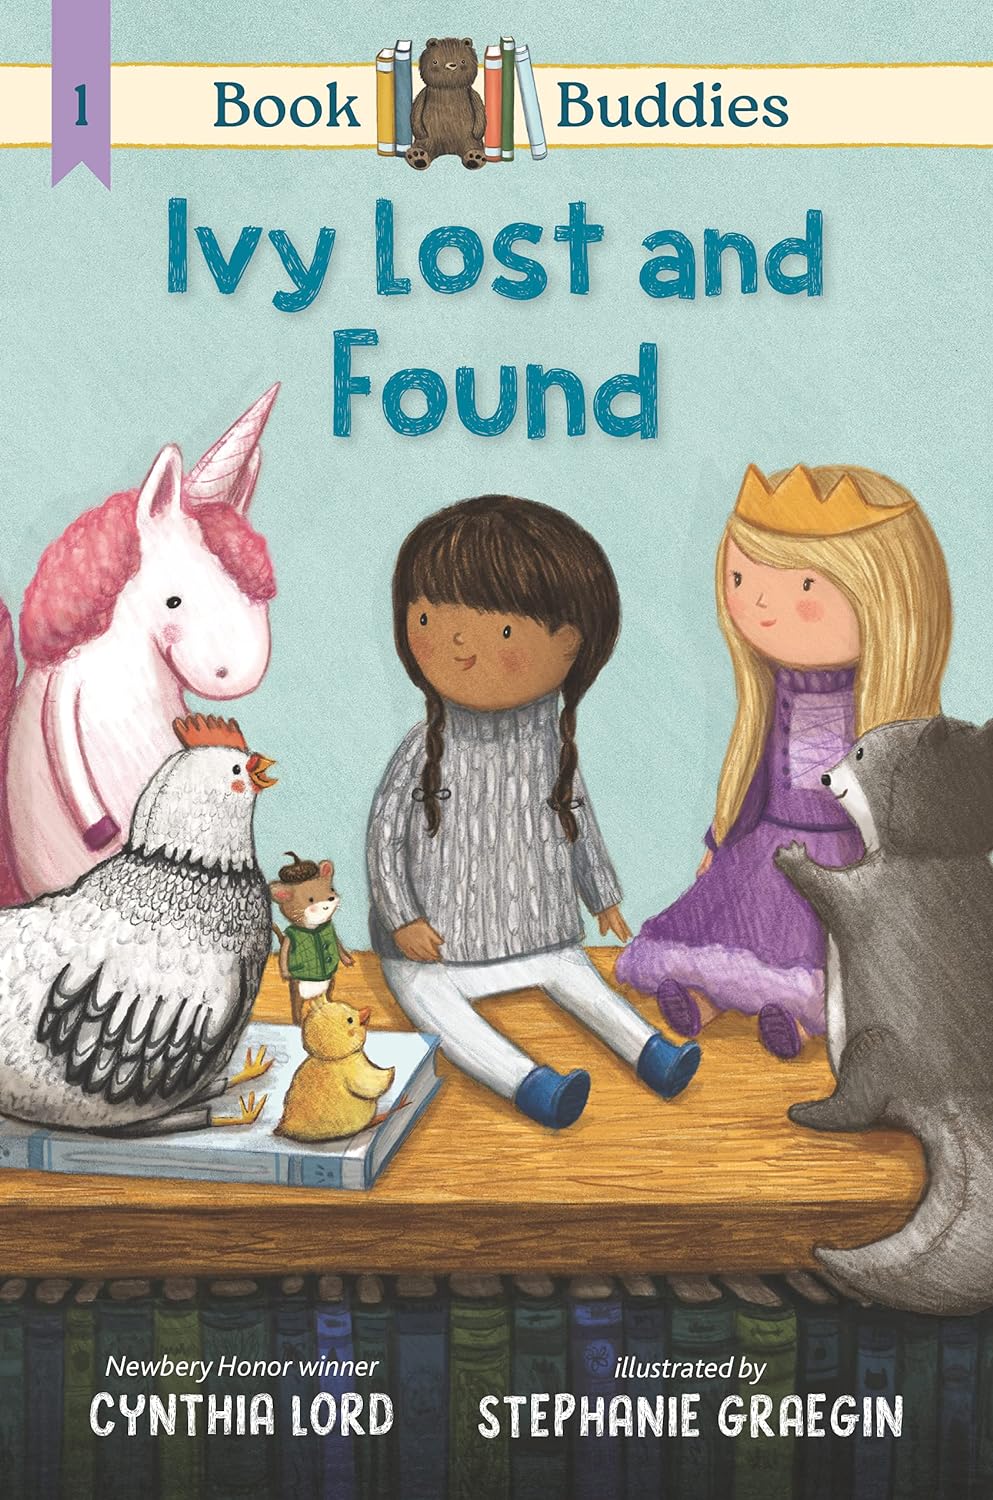 Cover of Ivy Lost and Found, showing a group of toys sitting on top of a book shelf.